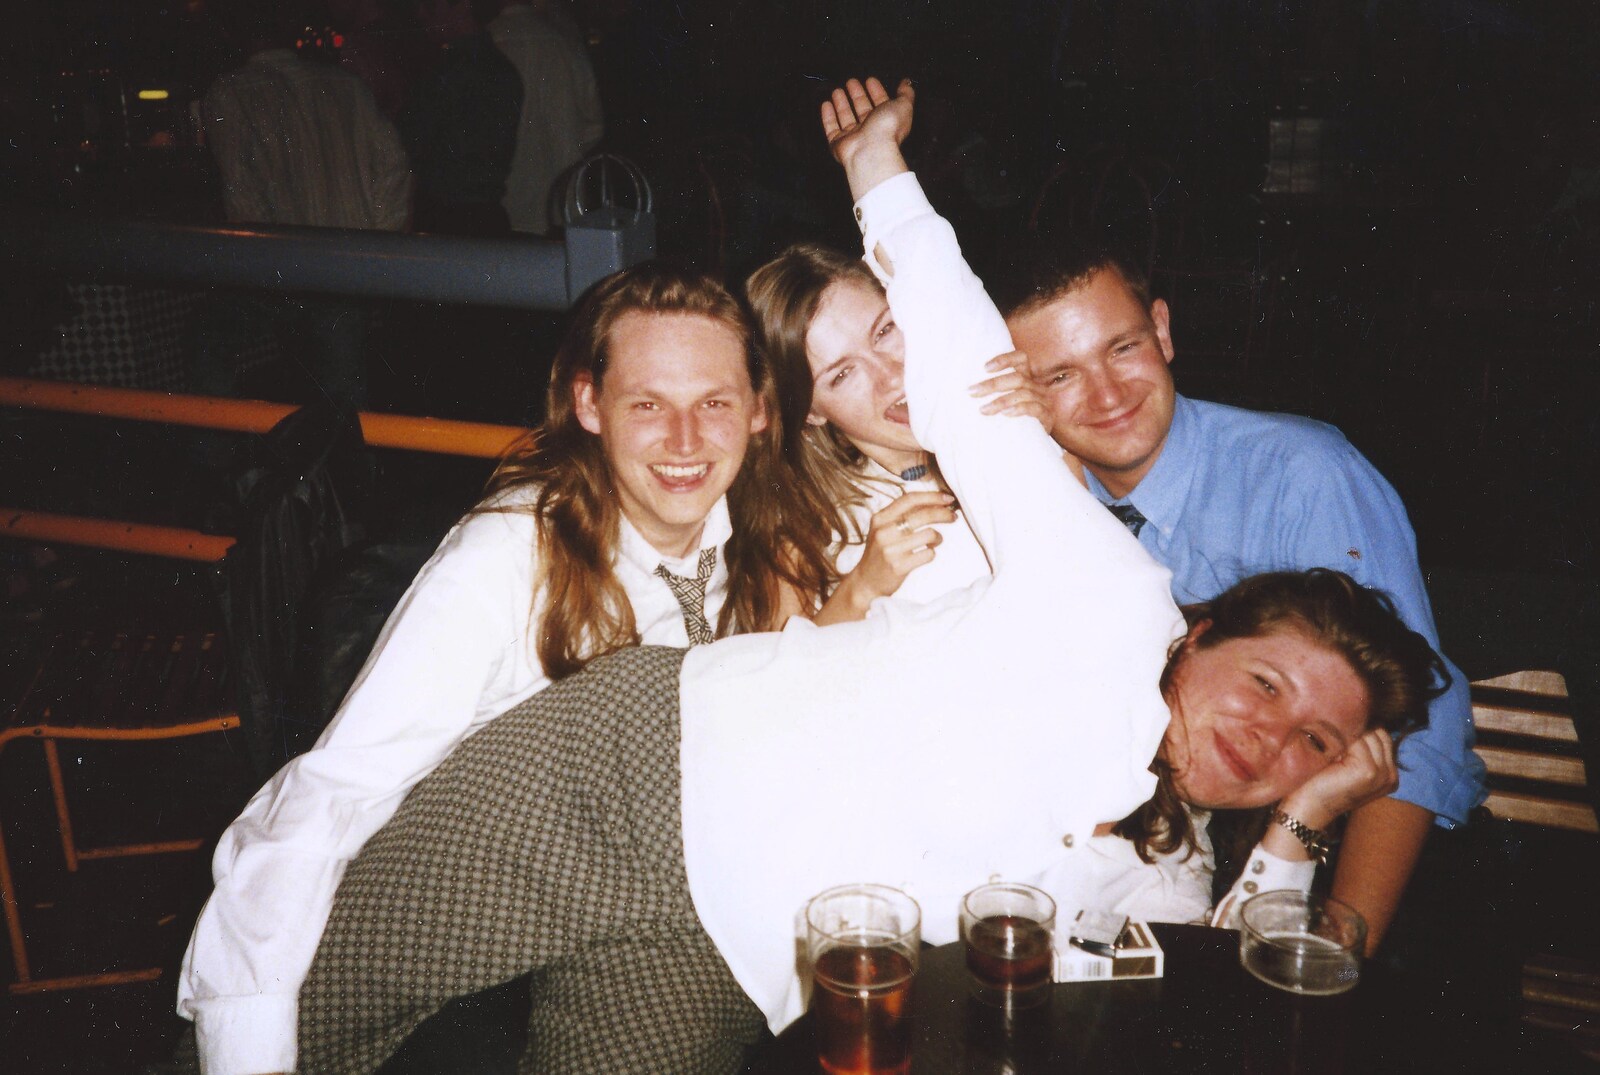 Sis Graduates from De Montfort, Leicester, Leicestershire - 9th August 1997: Nosher and Sis in a nightclub